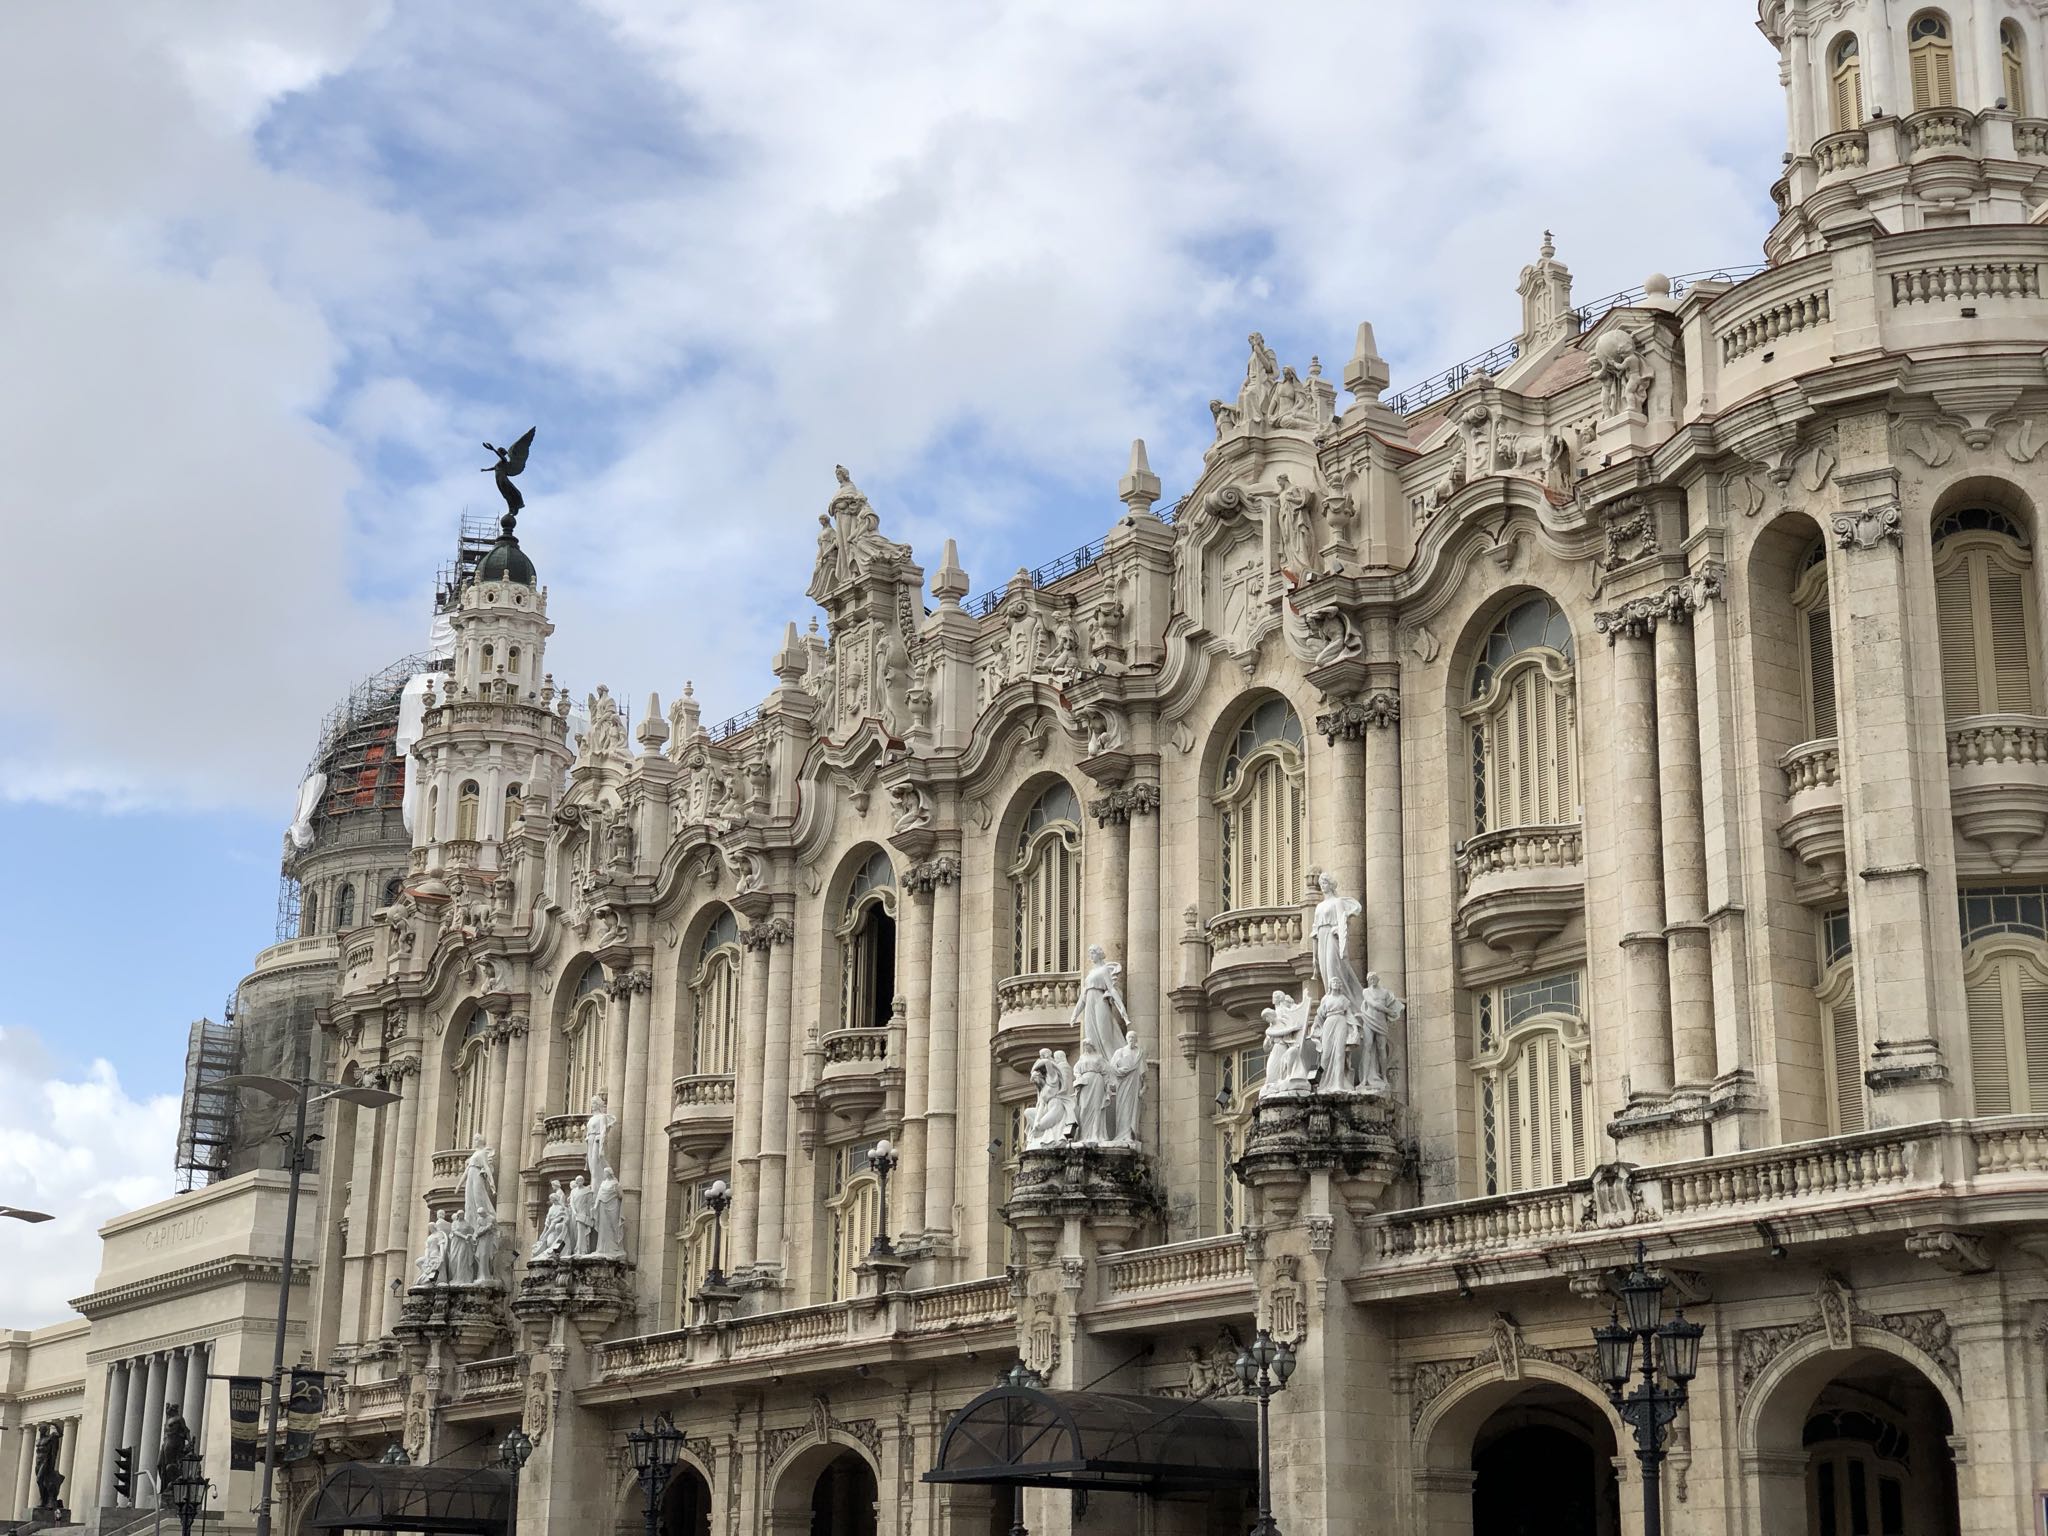 Photo 220 of 221 from the album Highlights Cuba 2019.